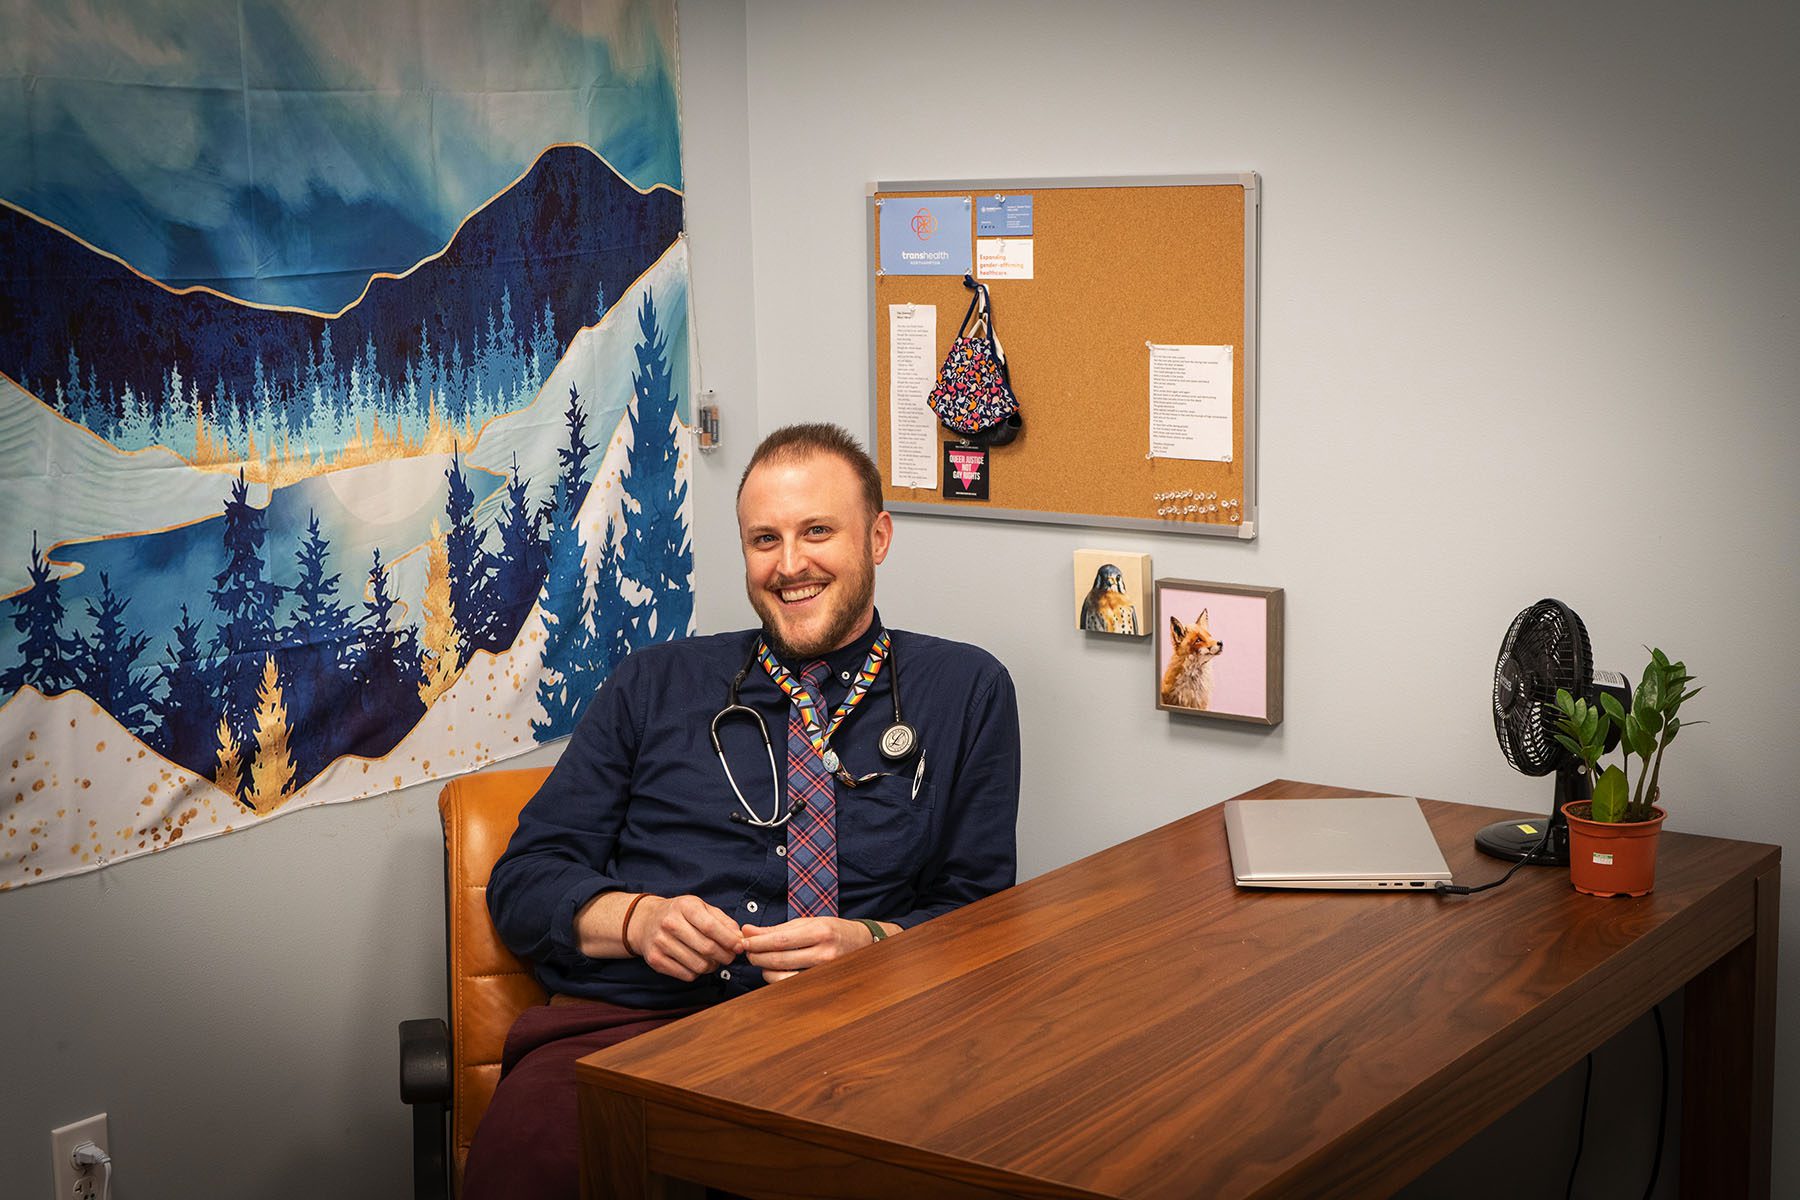 Dr. Sackett-Taylor smiles while sitting at his desk. The room is simply decorated: a corkboard, a plant, a tapestry with blue trees and mountains.